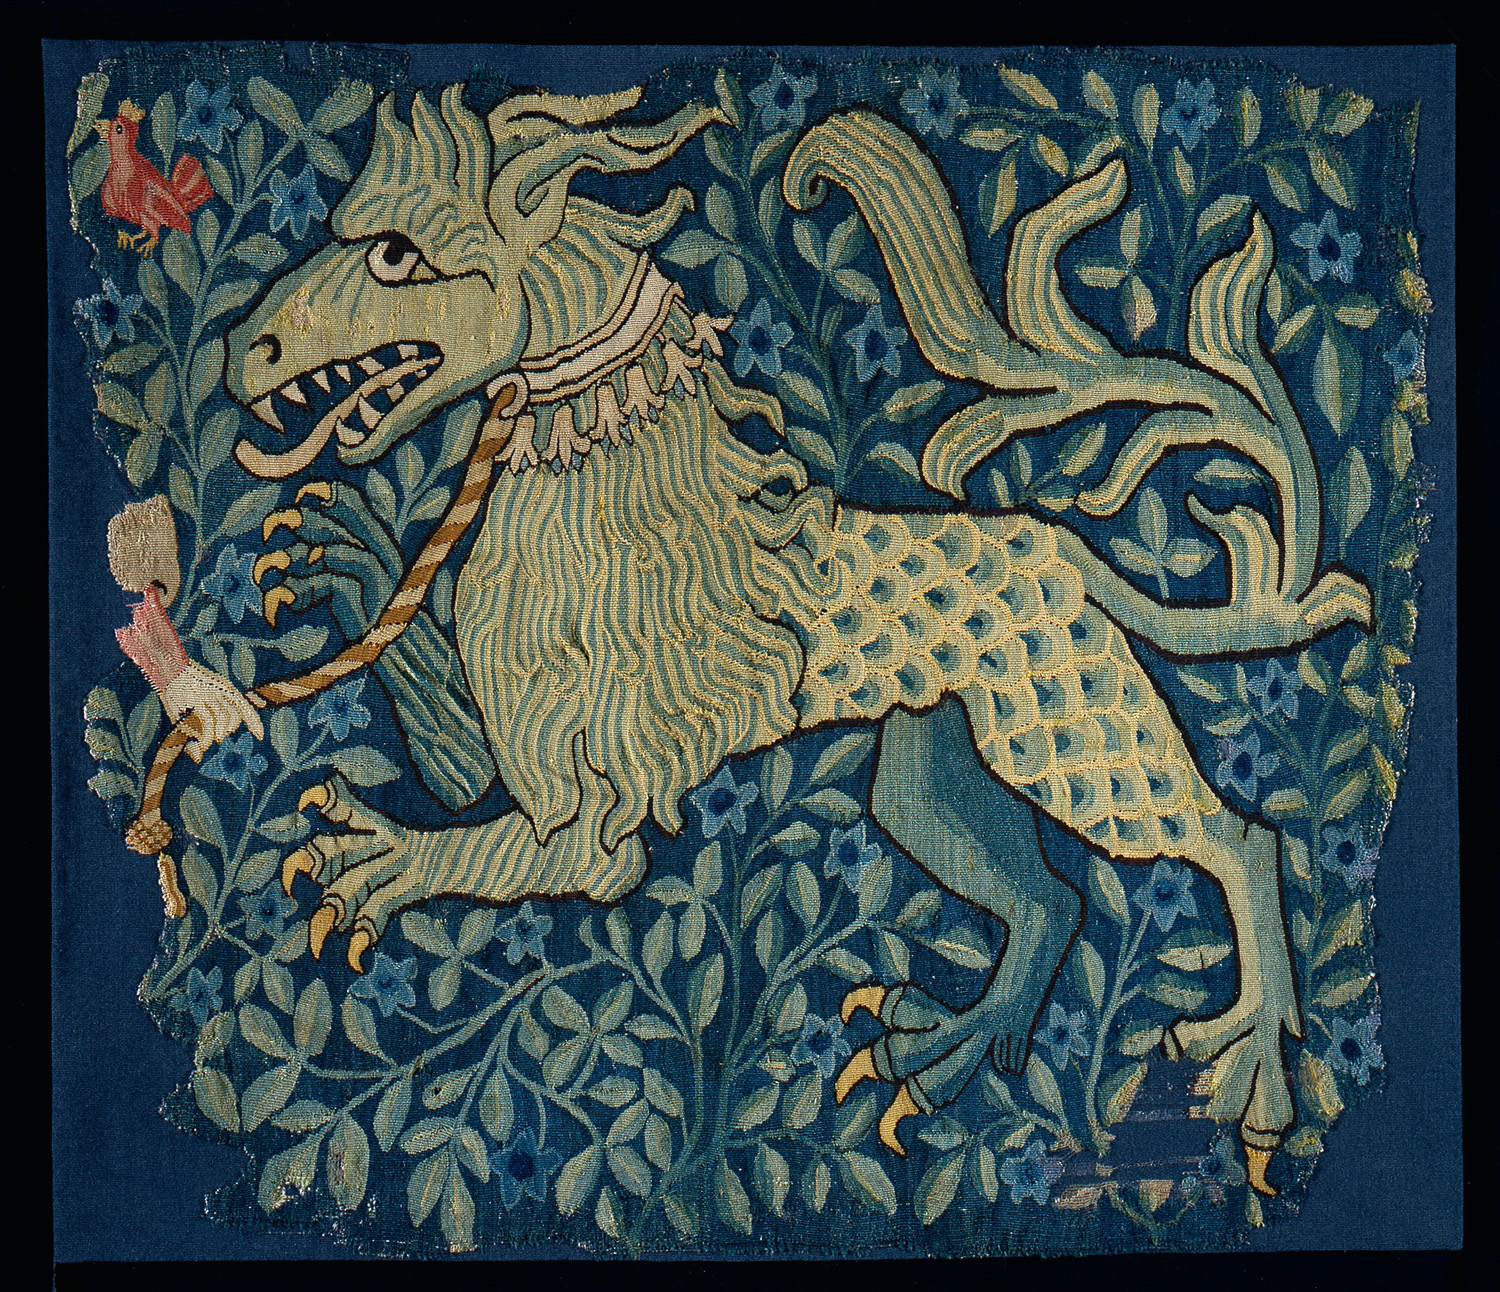 A tapestry details the image of a hybrid animal creature featuring claws, scales, a tail and a lion's mane.